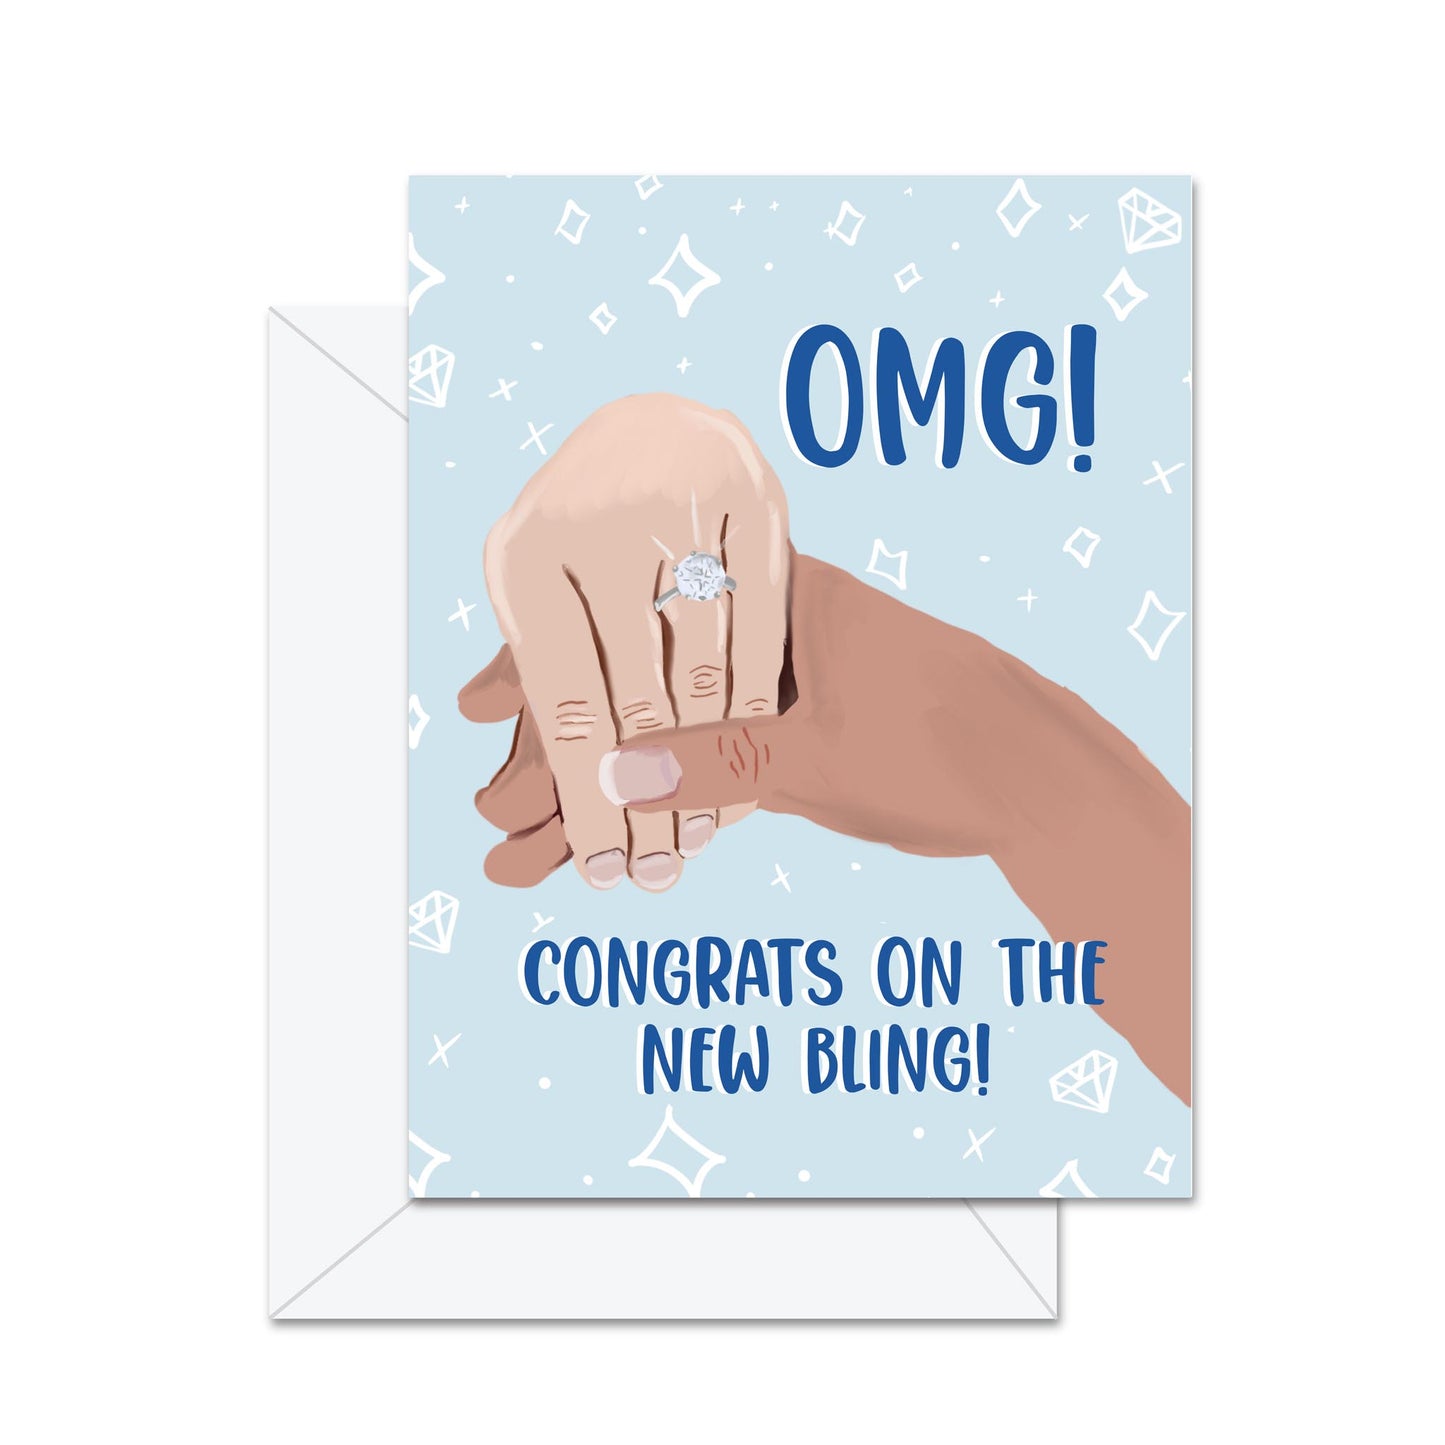 OMG! Congrats on the New Bling! - Greeting Card